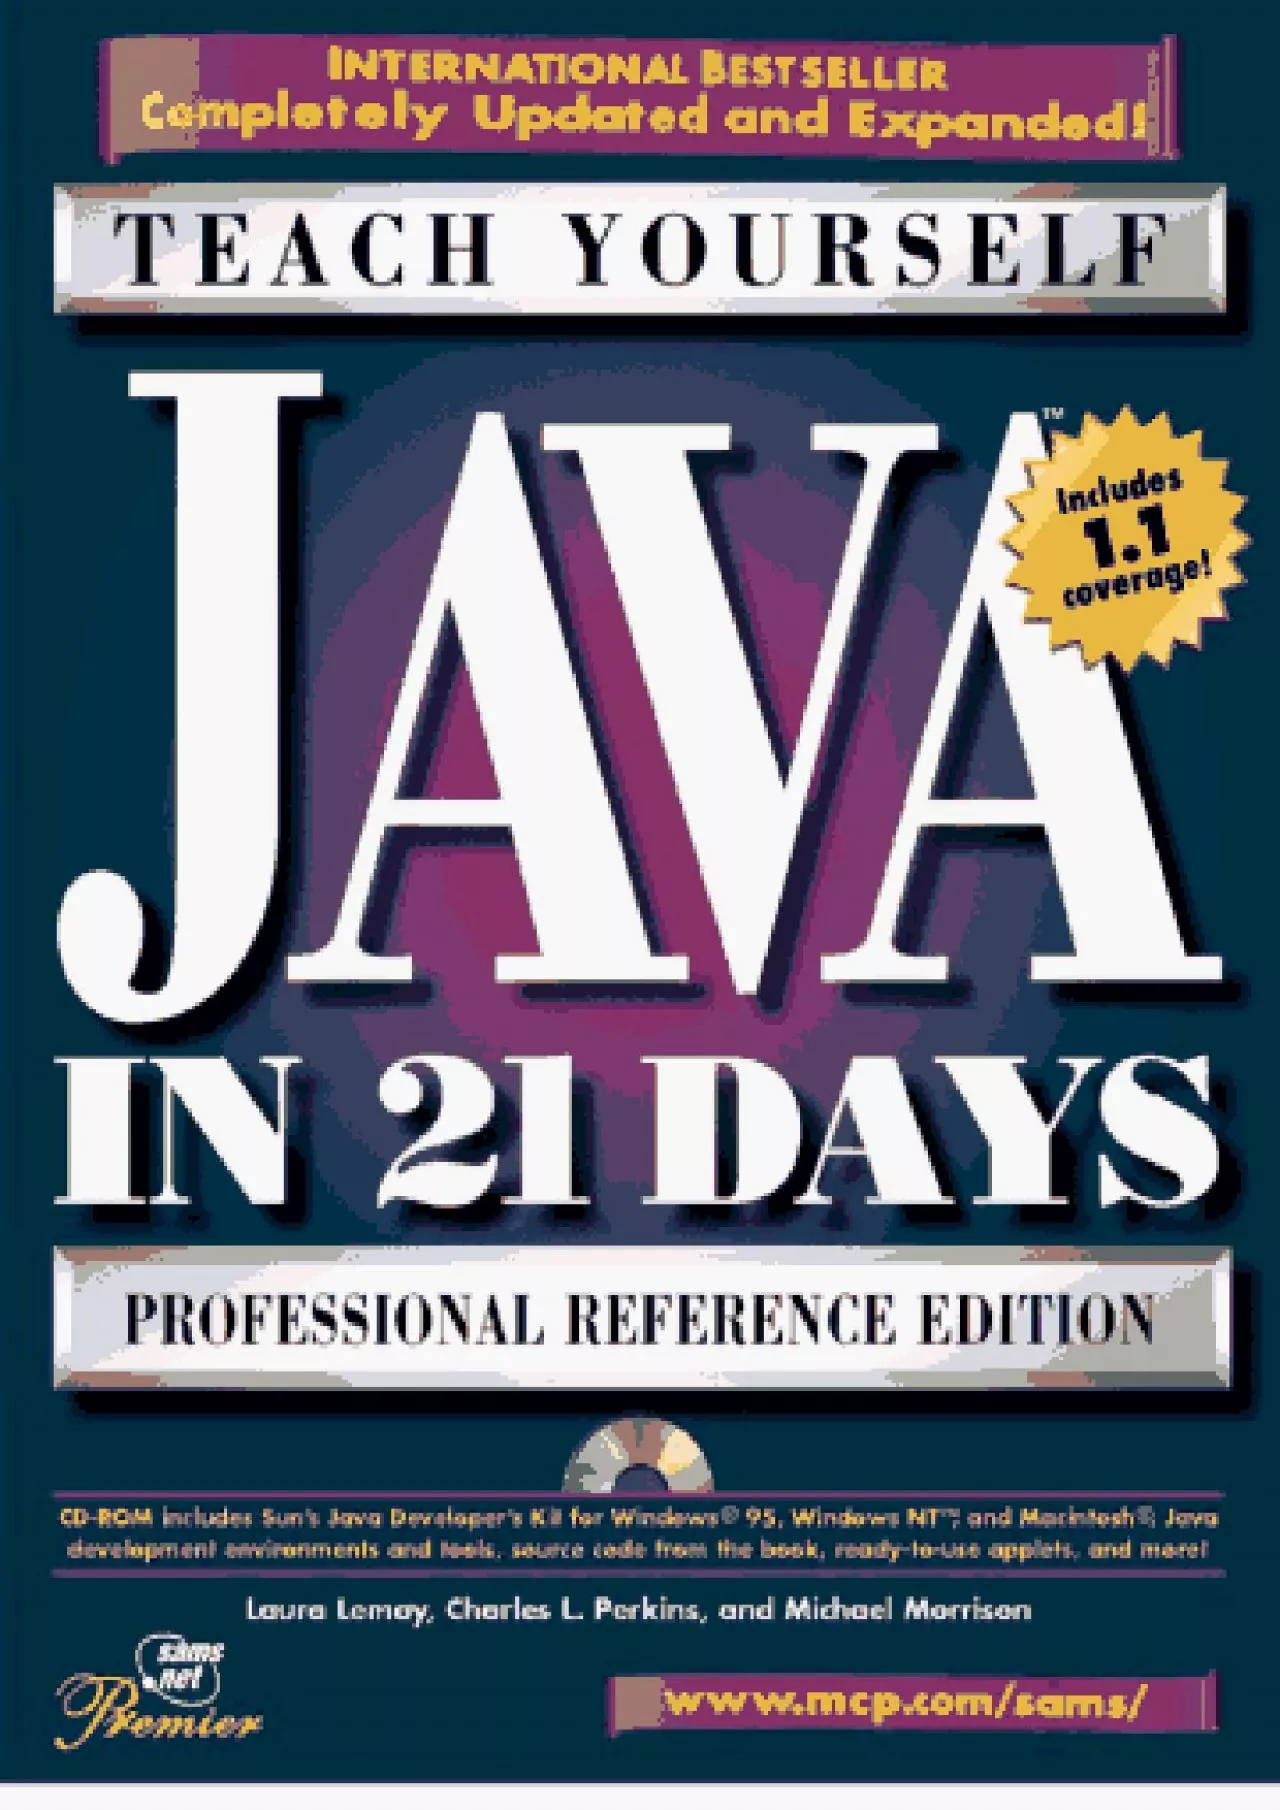 [READING BOOK]-Teach Yourself Java in 21 Days: Professional Reference Edition